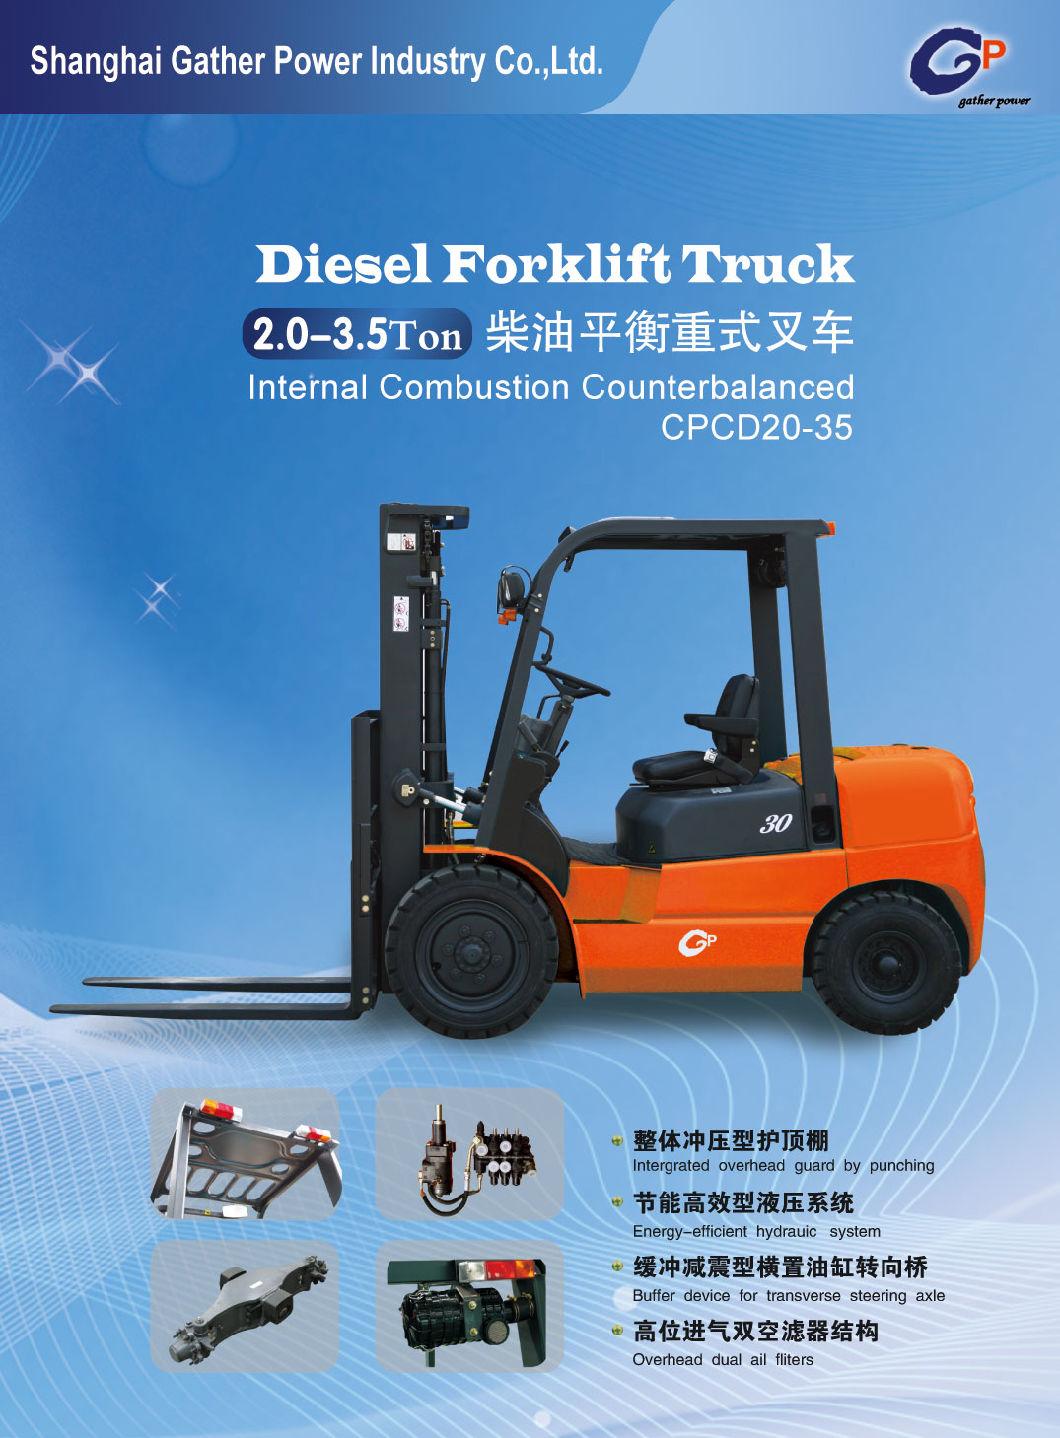 High Quality Chinese Gp Brand Diesel Power Forklift with 3ton Loading Capacity (CPCD25)